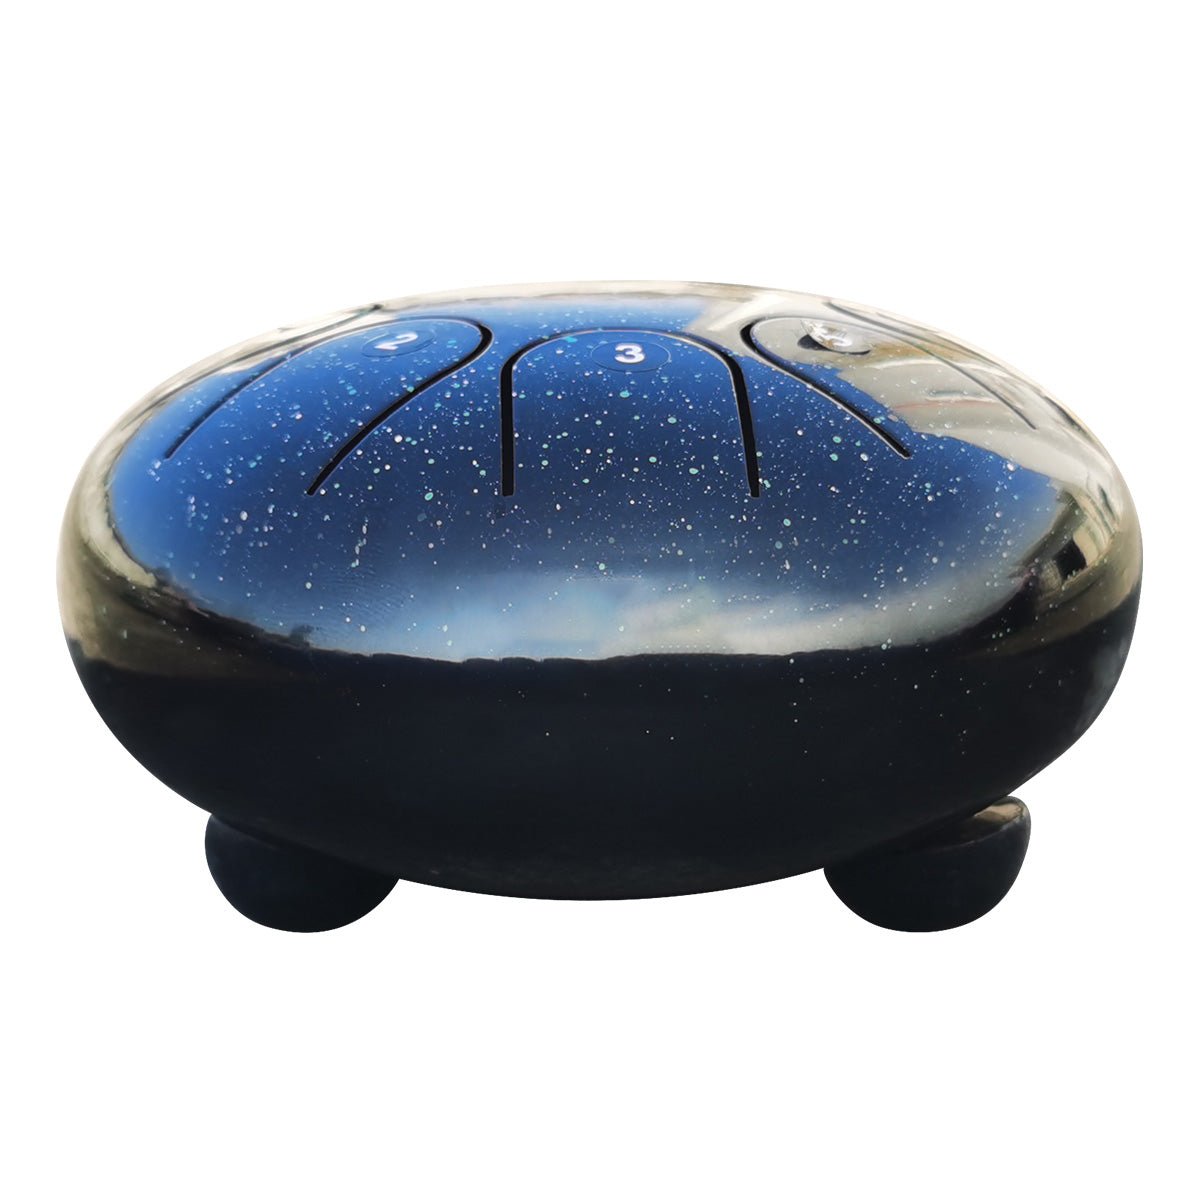 AS TEMAN Steel Tongue Drum | Starry Sky Series 6'' Tank Drum for Yoga & Meditation with gift set - AS TEMAN